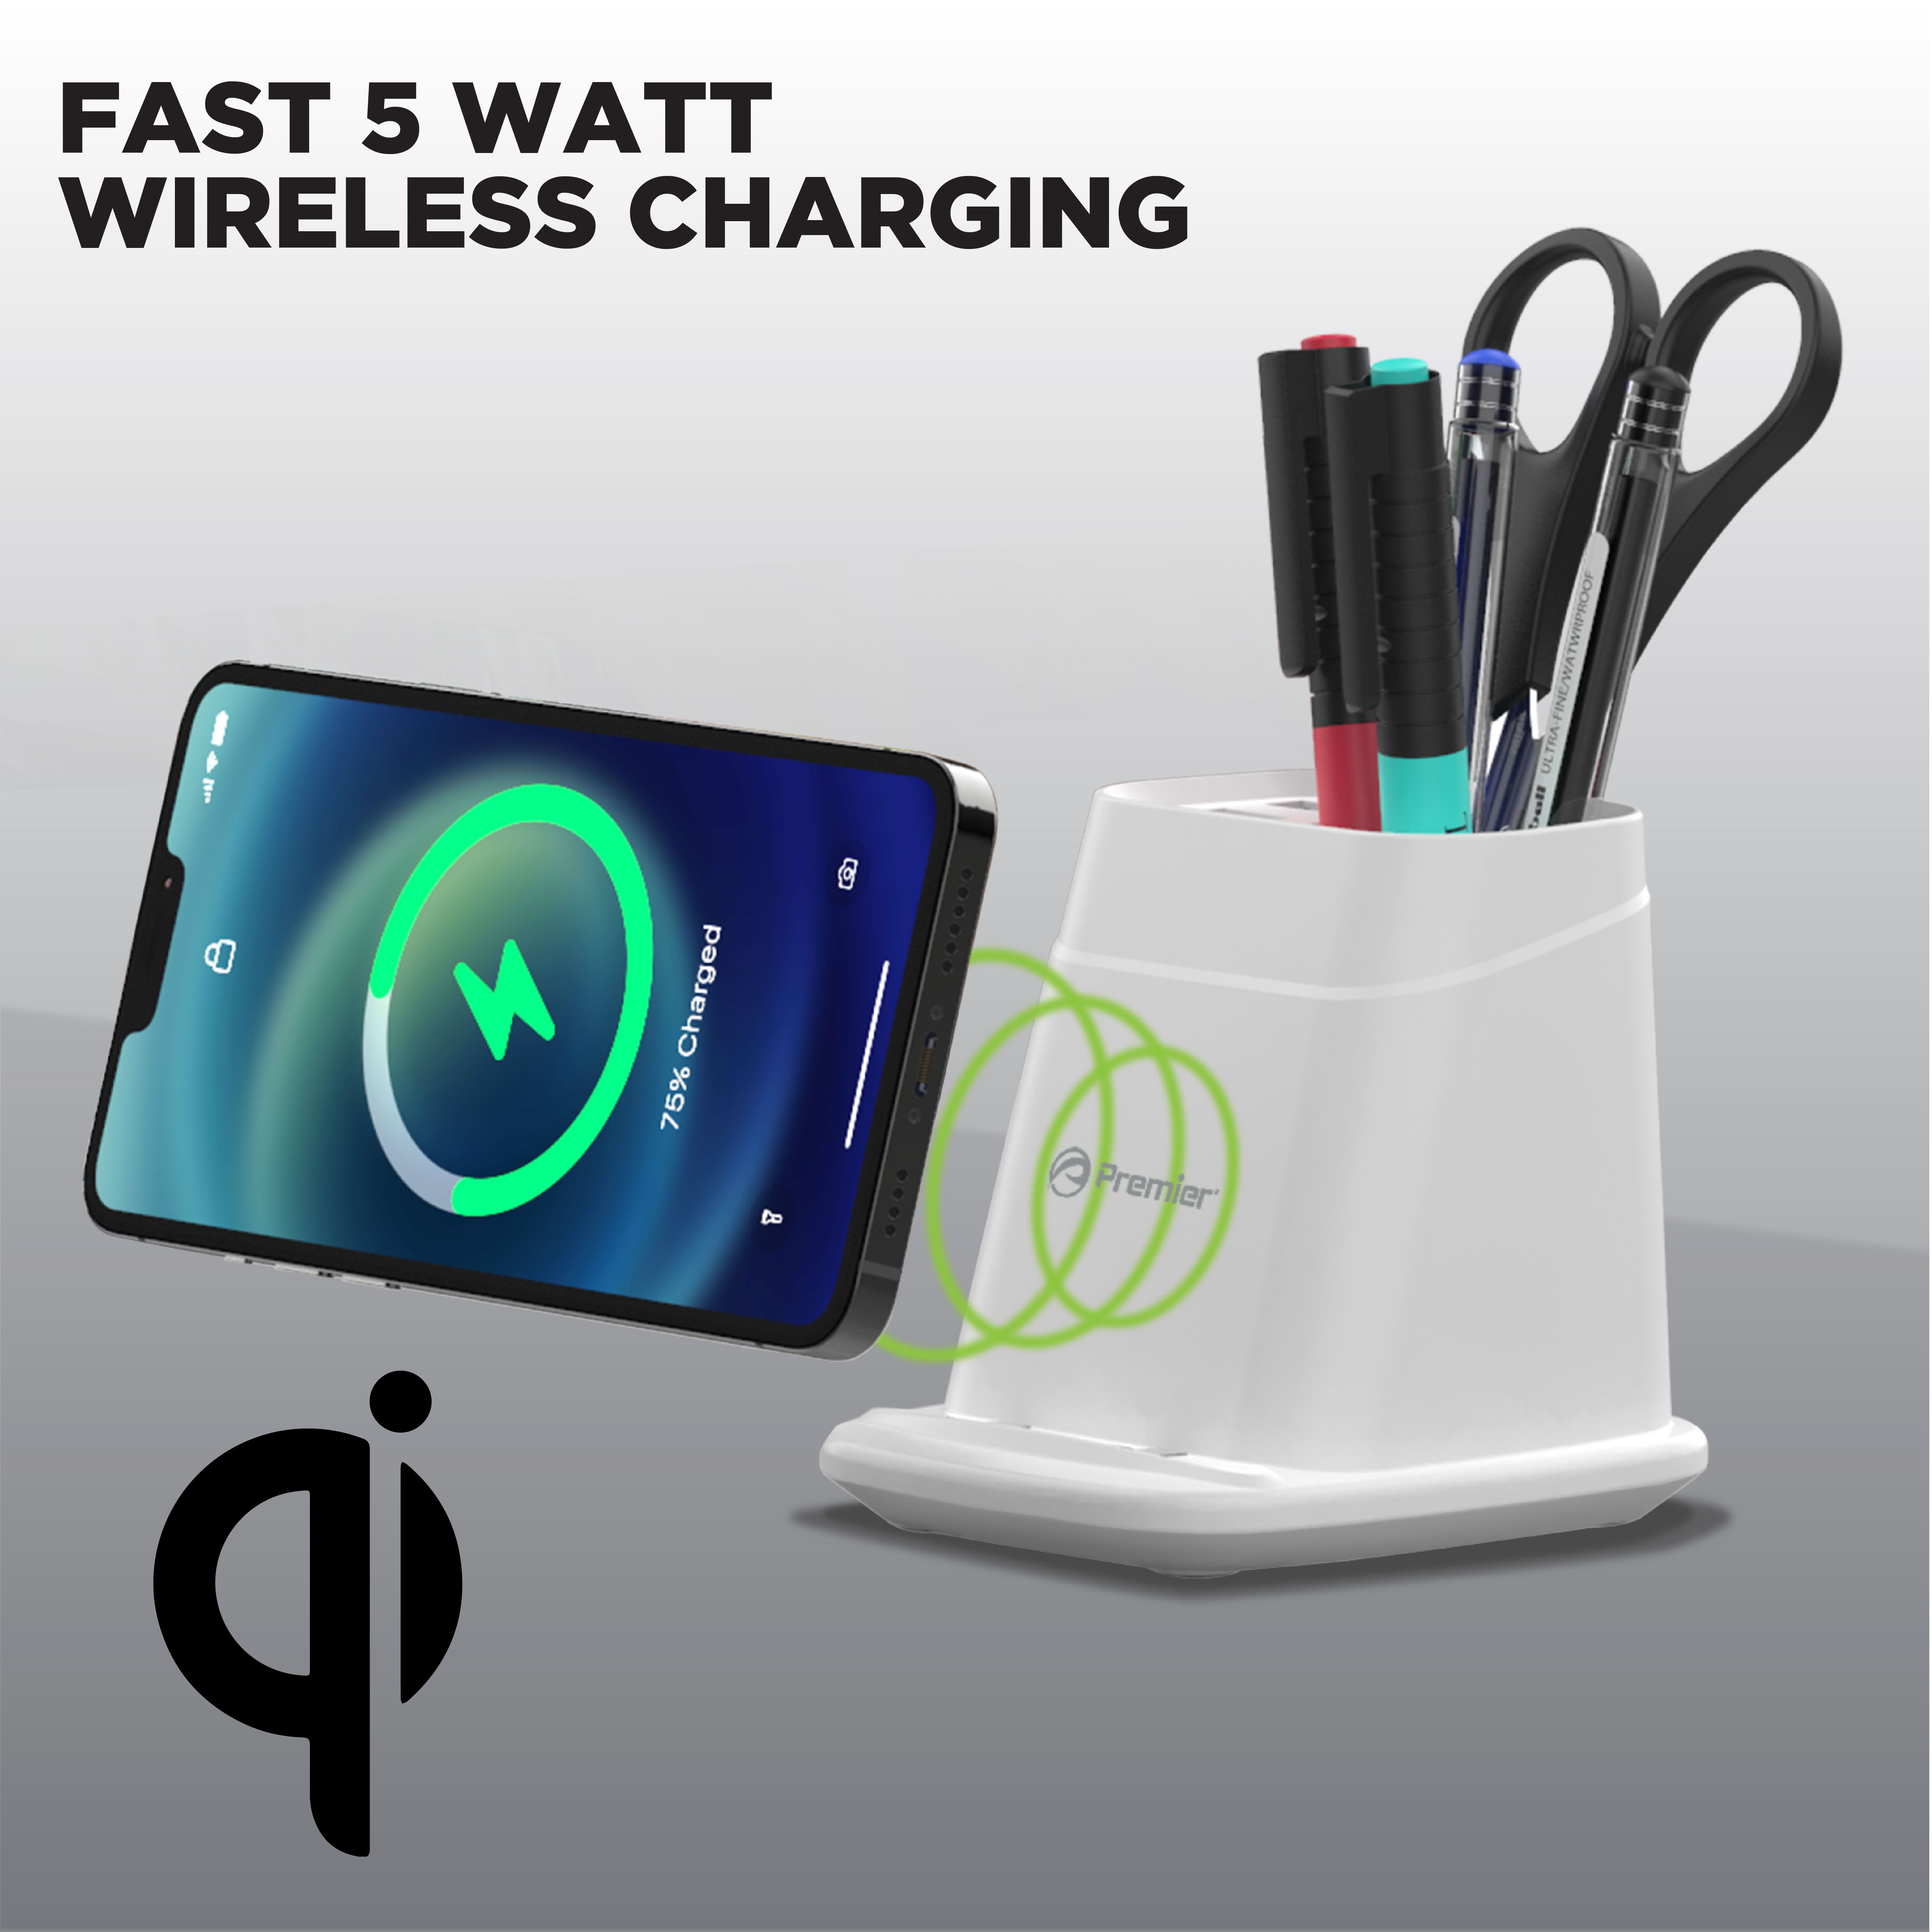 All-Purpose Wireless Charger Pen Holder with Dual USB Output